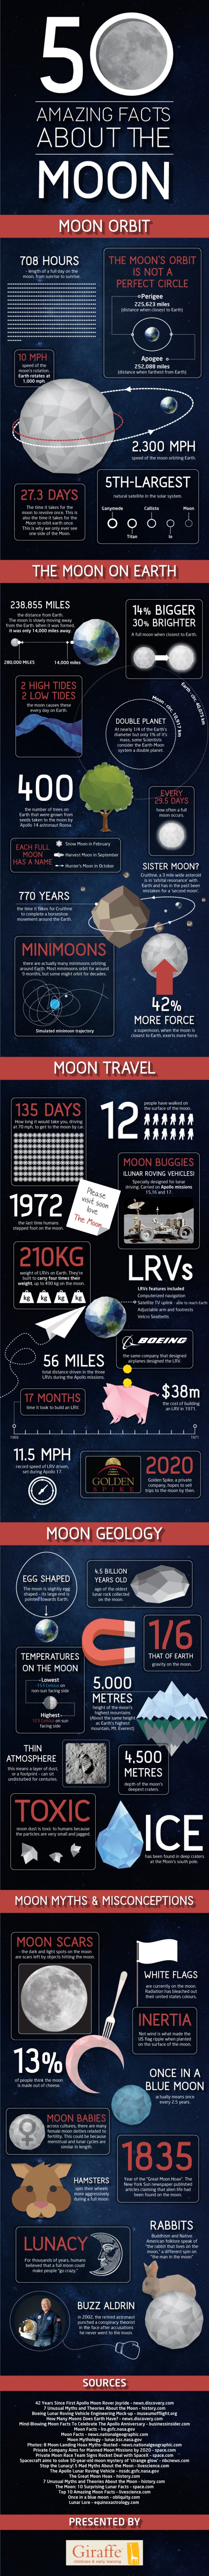 50 Amazing Facts About the Moon Infographic